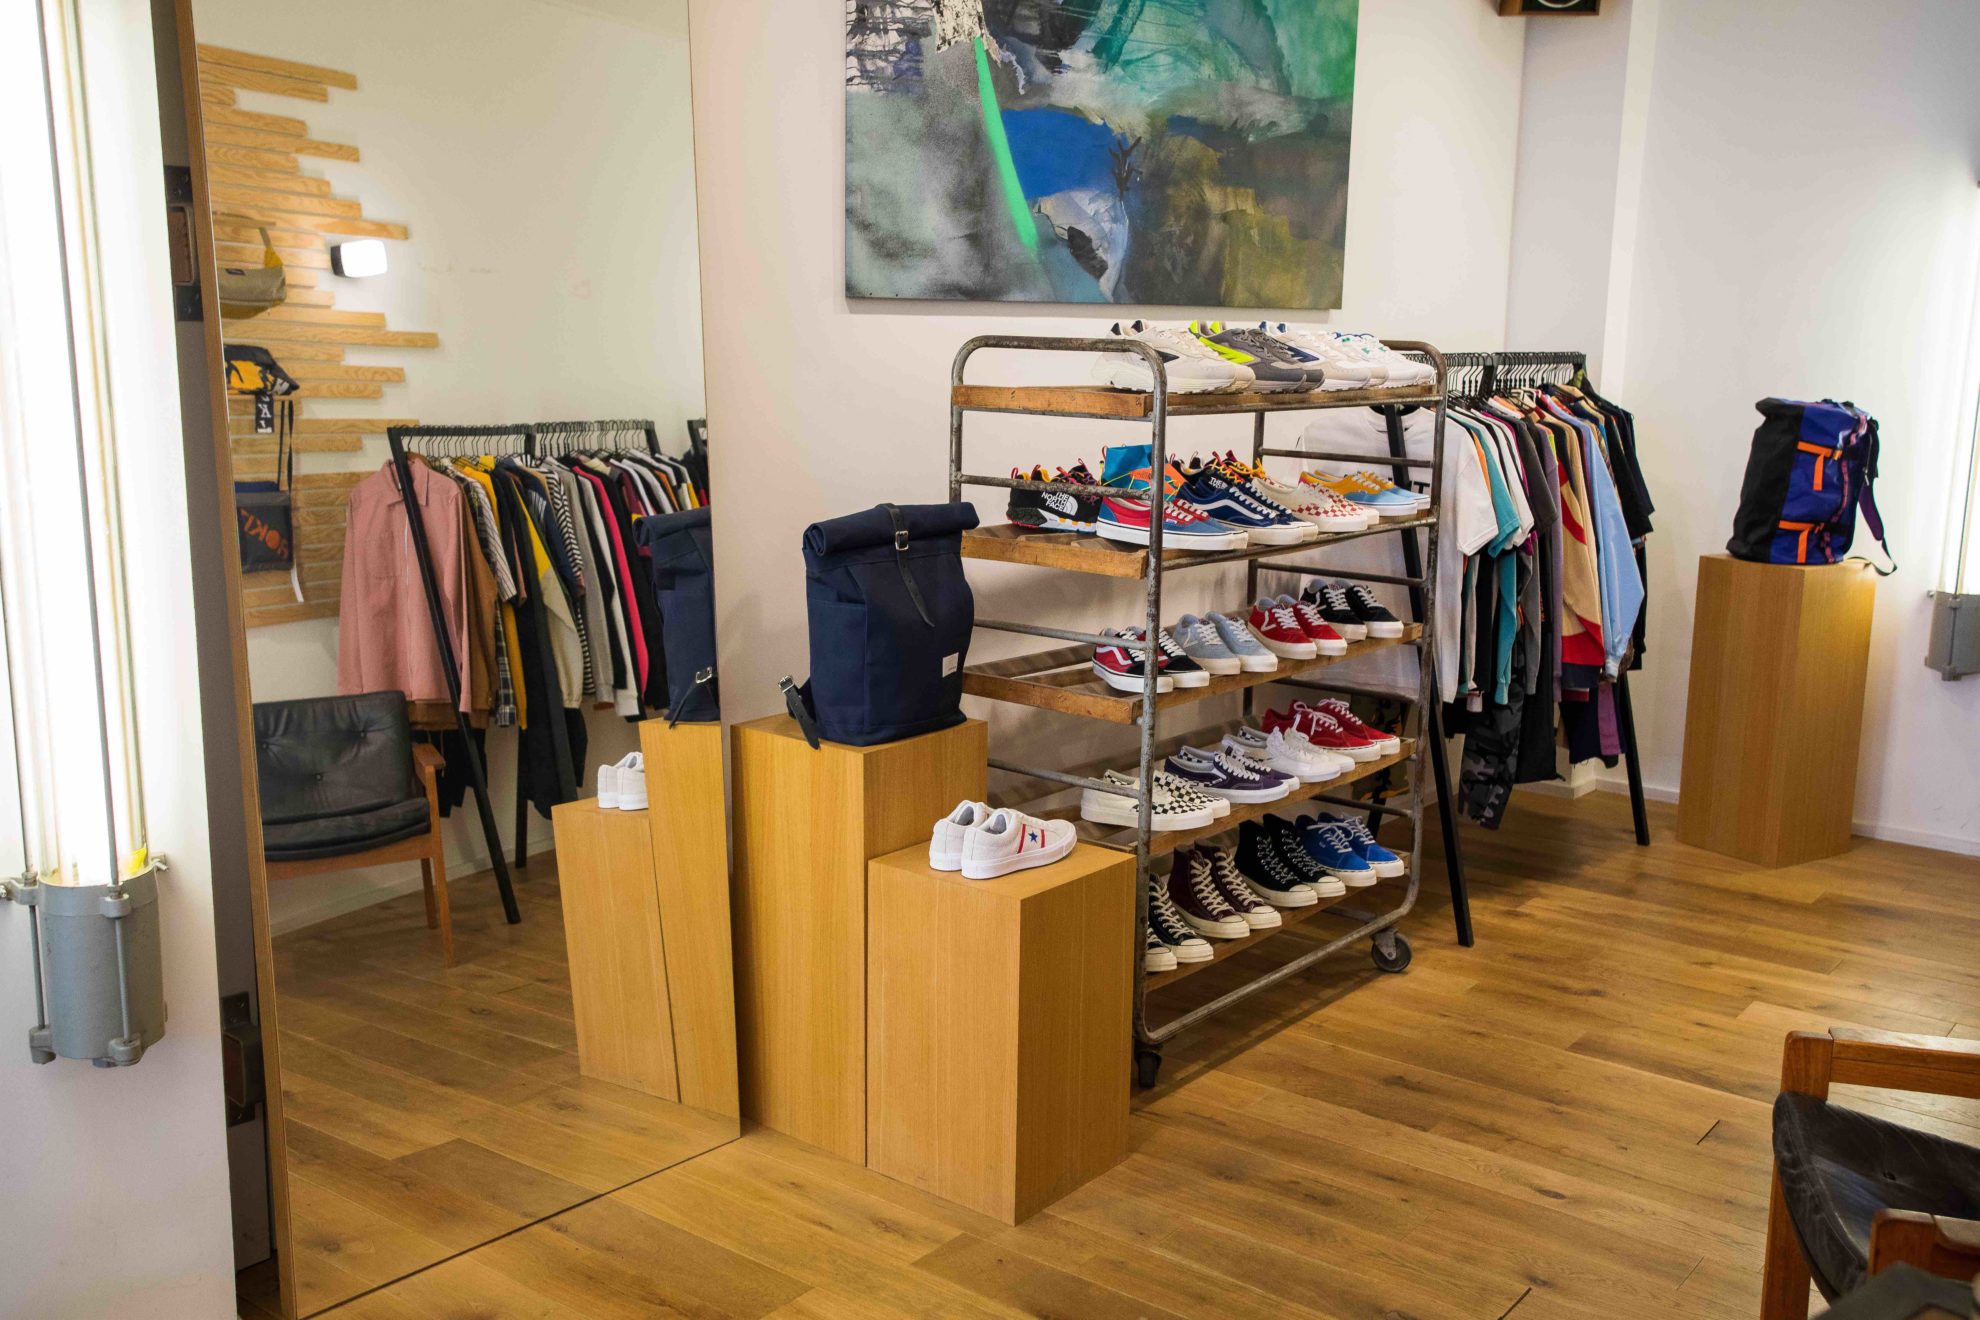 Centreville Clothing Store : A vision for the future in Brussels